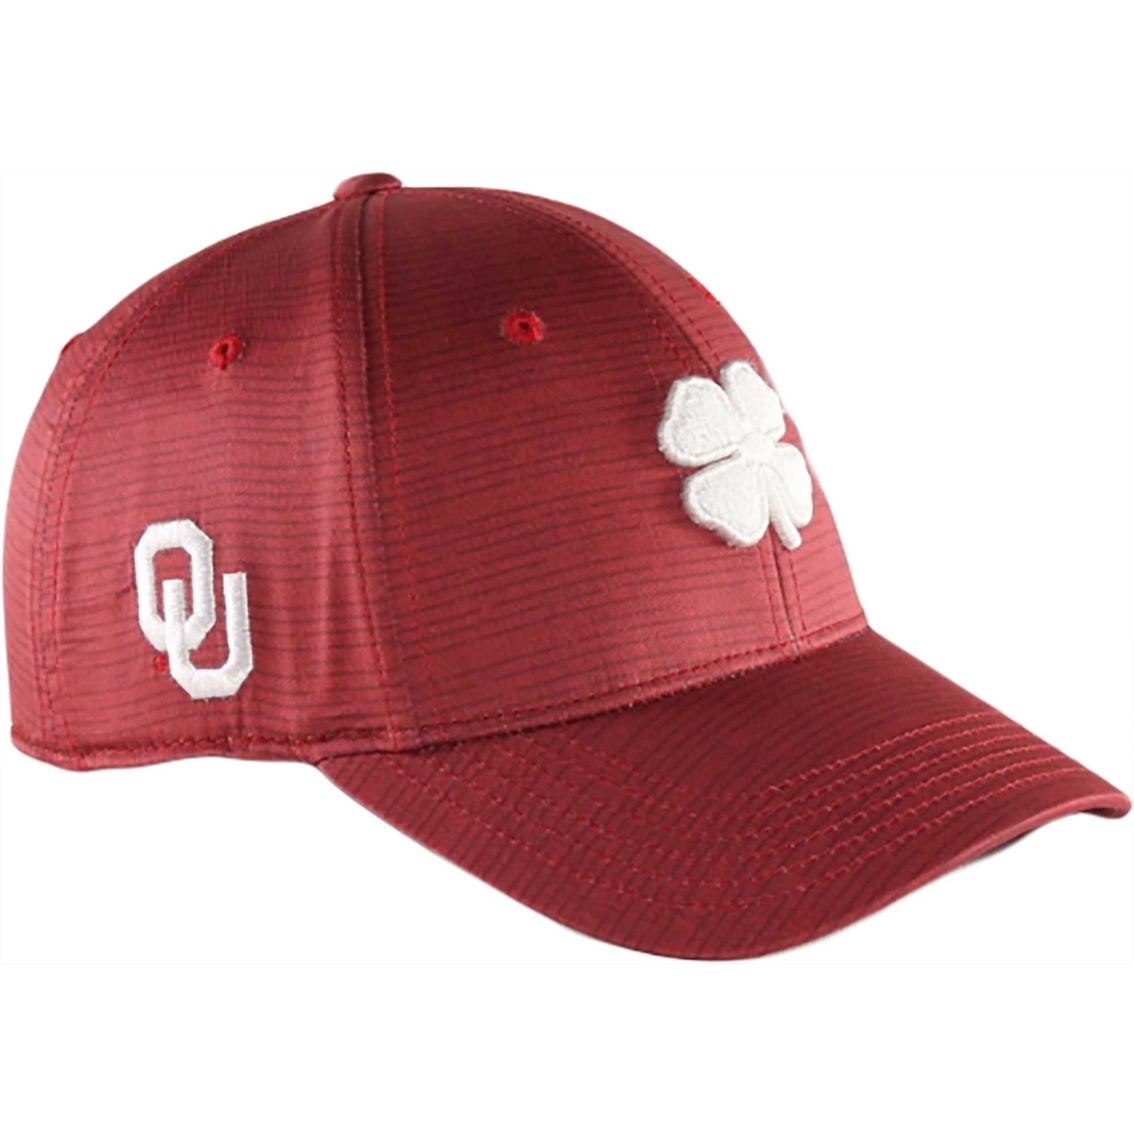 Black Clover Crazy Luck University of Oklahoma Hat - Image 2 of 3